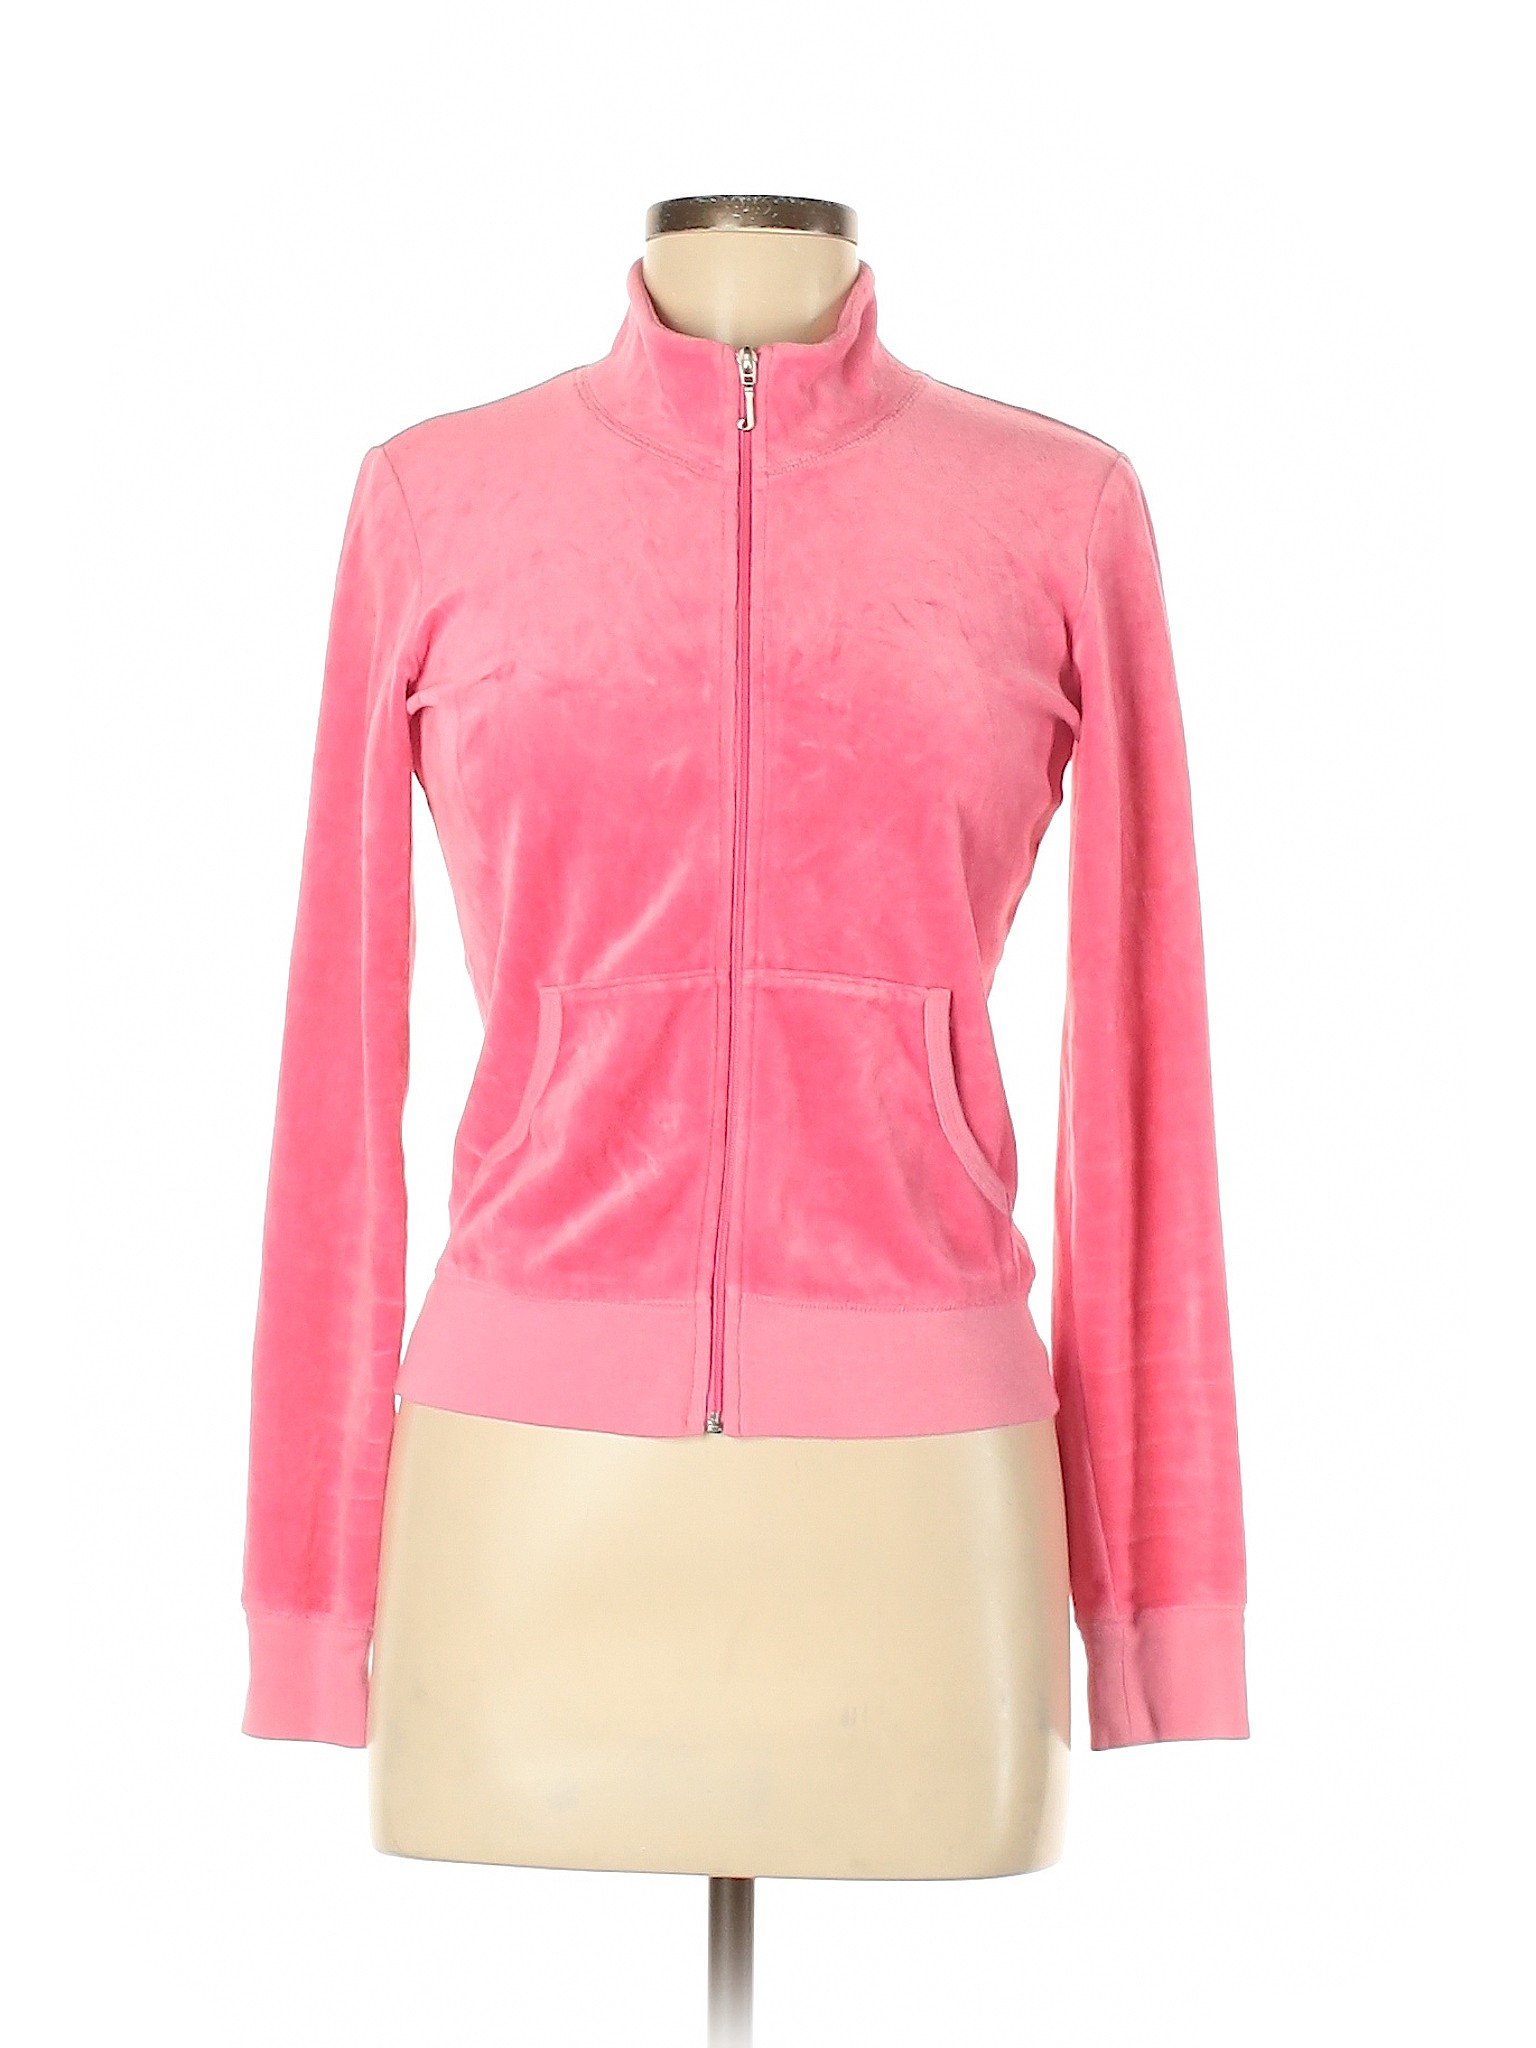 Juicy Couture Solid Pink Jacket Size M - 88% off | thredUP